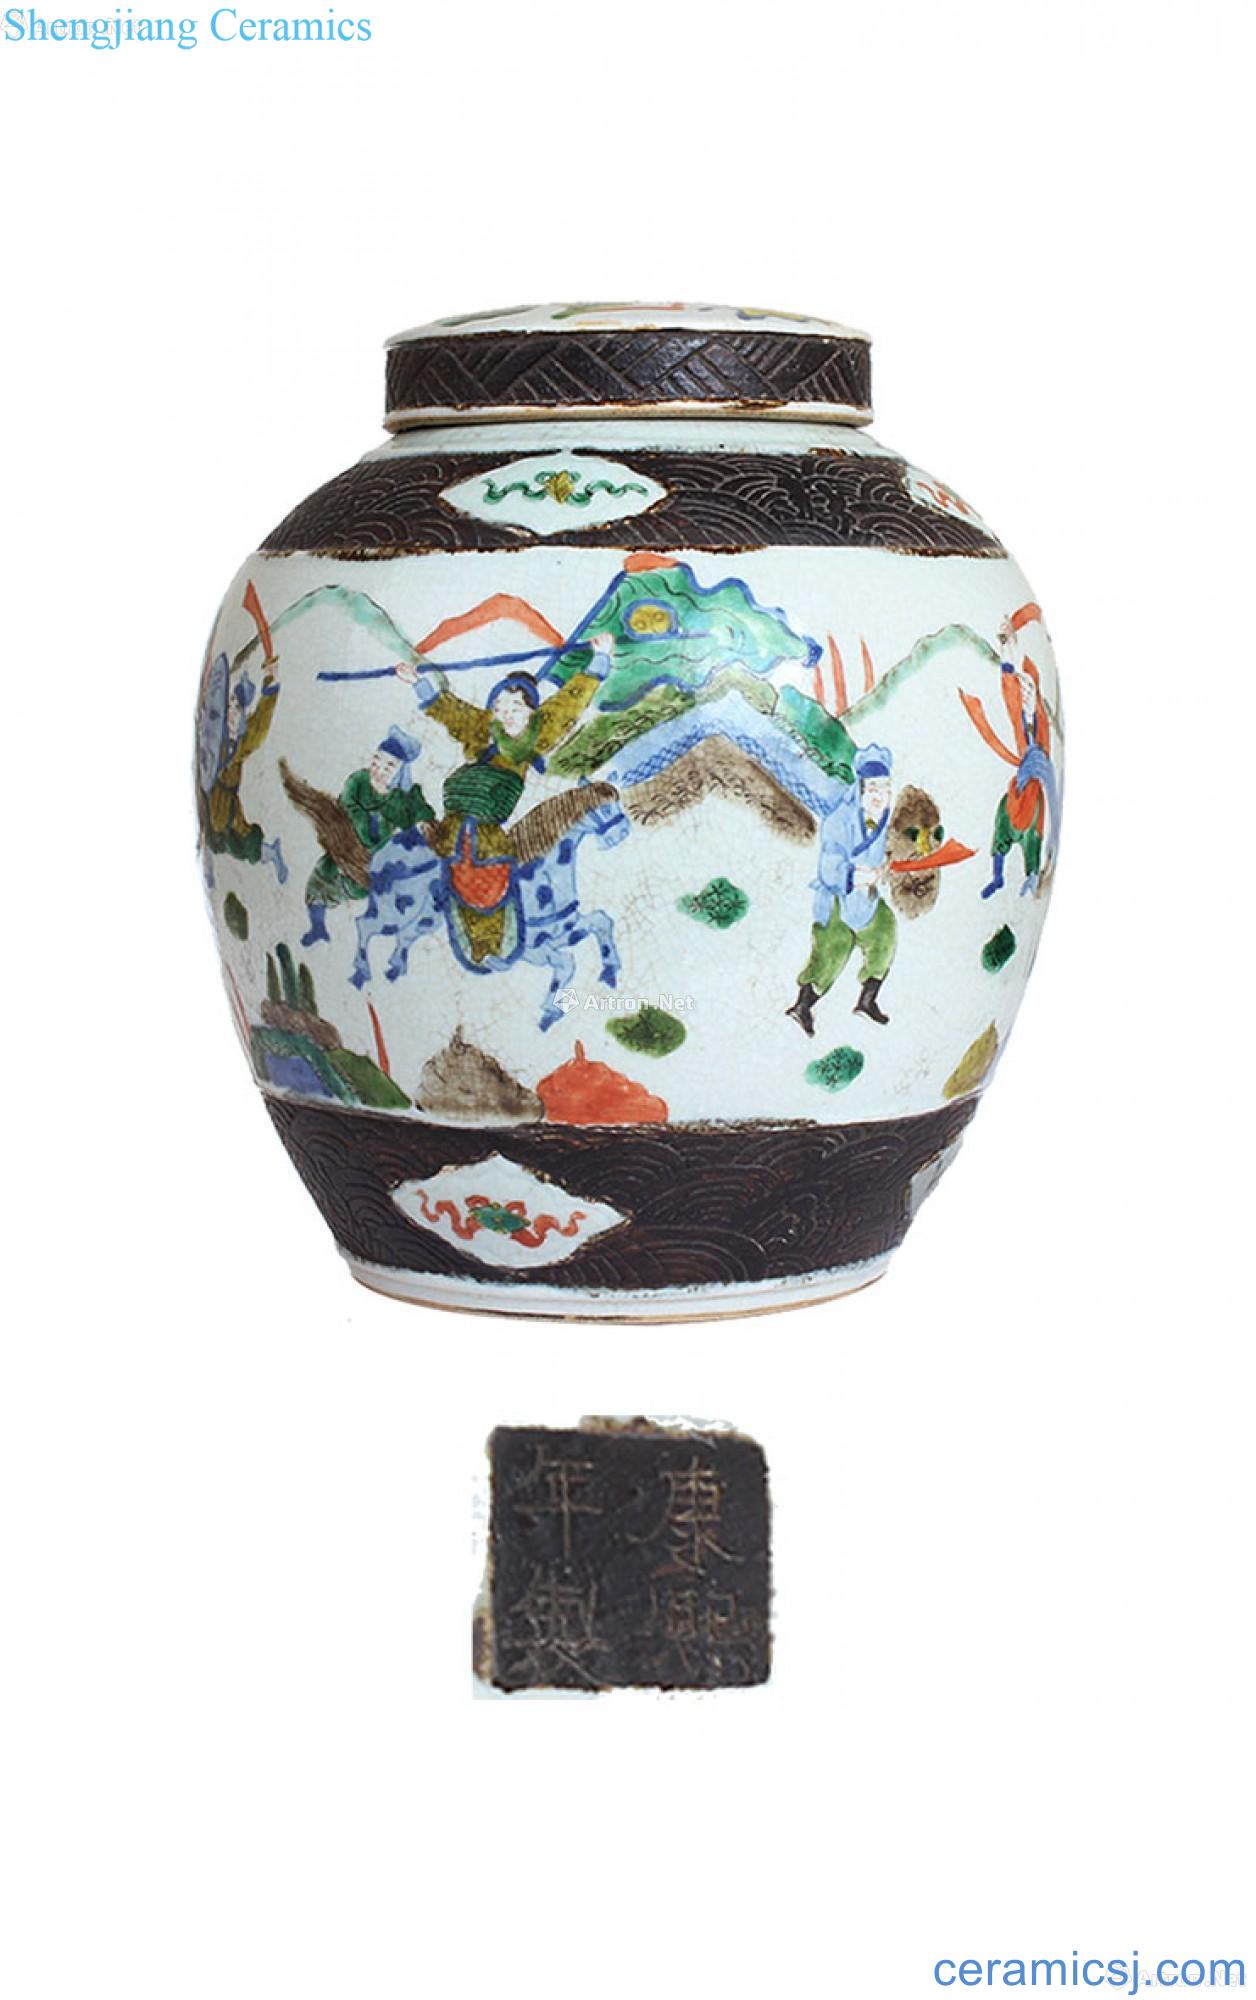 Kangxi stories of colorful cover canister